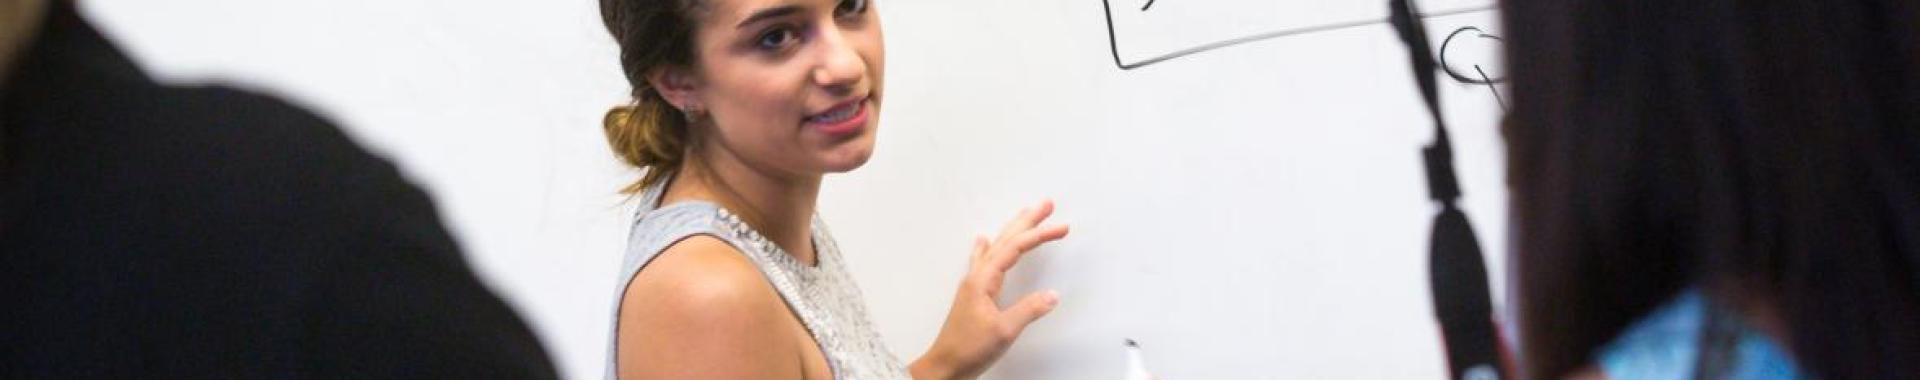 Woman standing in front of whiteboard holding a marker and speaking into a camera.